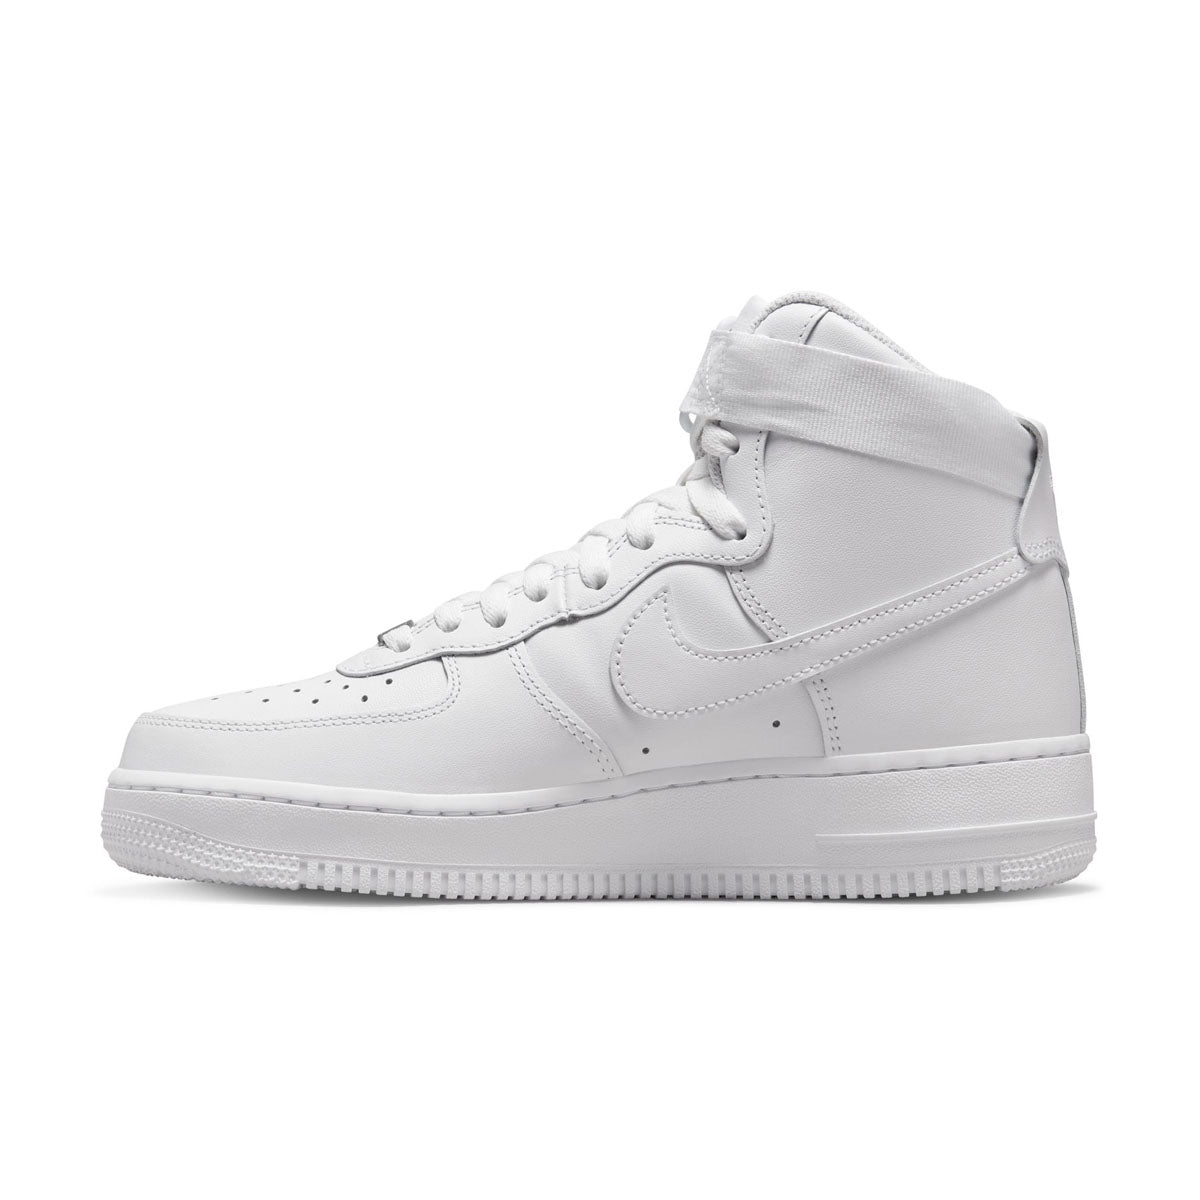 Nike Women's Air Force 1 Basketball Shoes, White